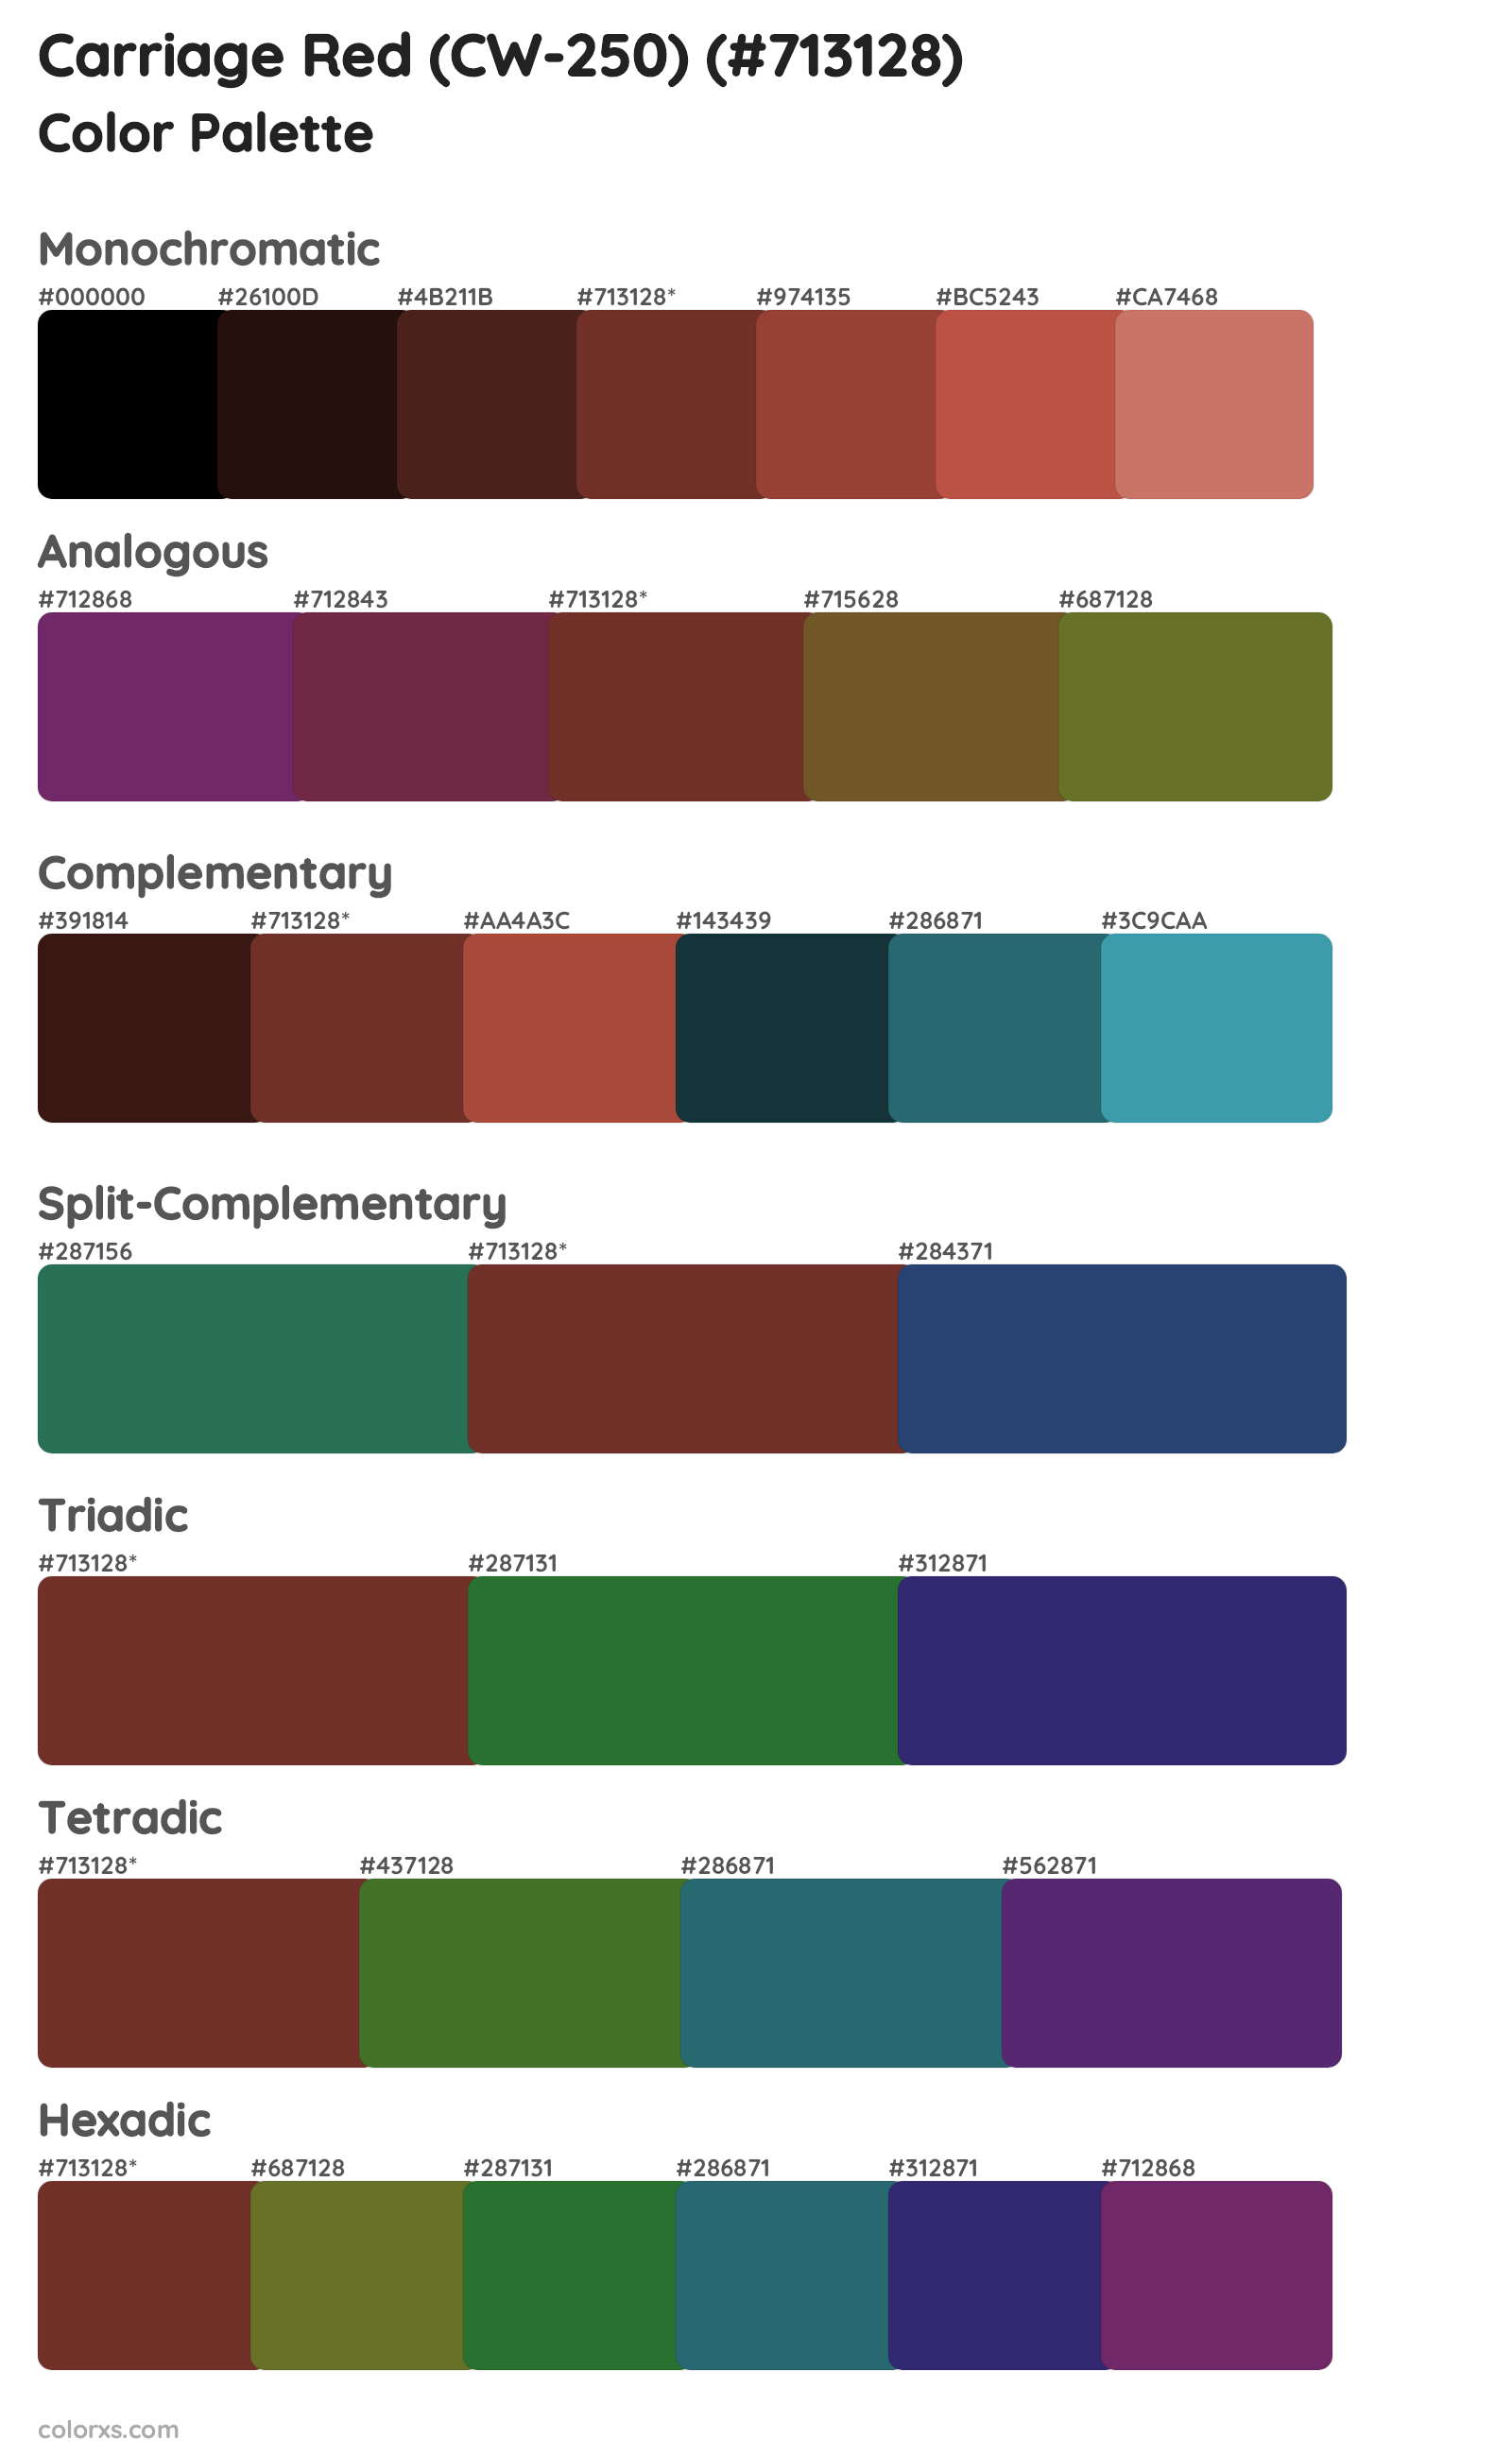 Carriage Red (CW-250) Color Scheme Palettes